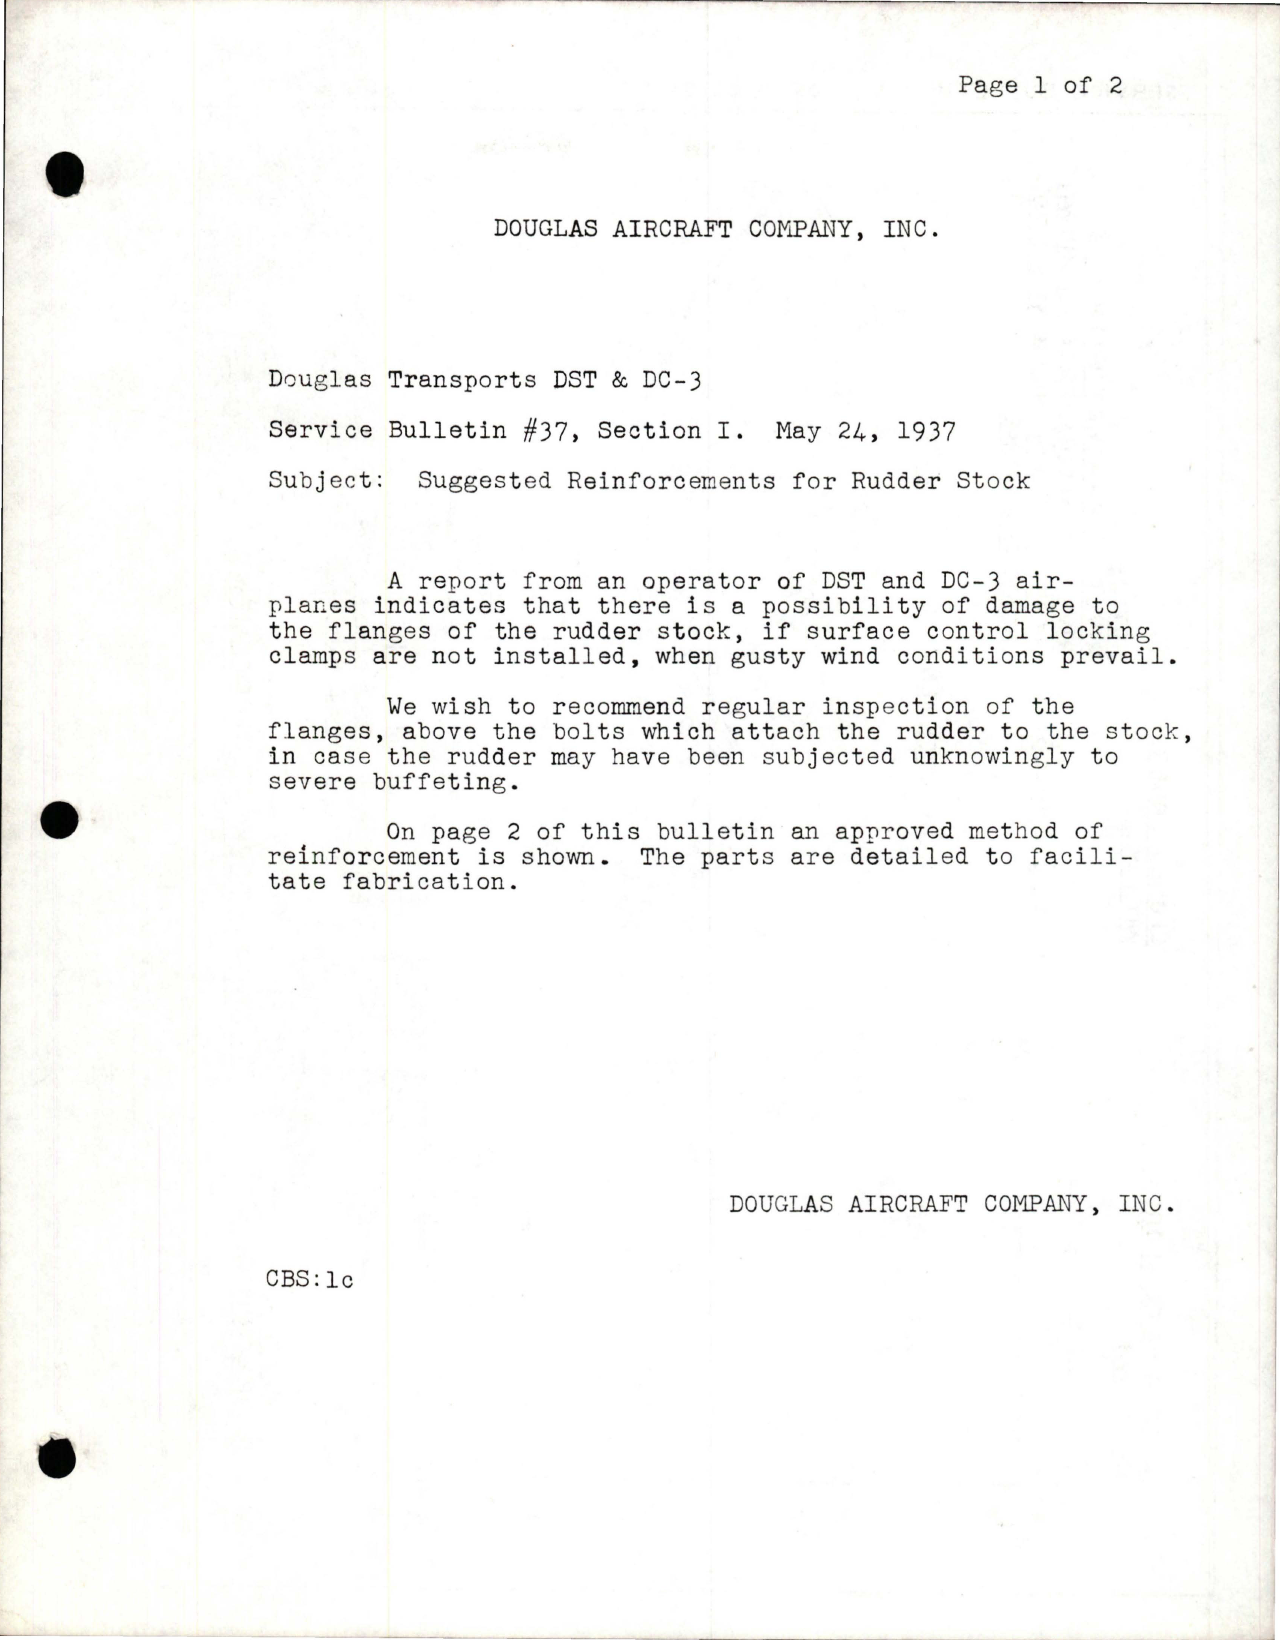 Sample page 1 from AirCorps Library document: Suggested Reinforcements for Rudder Stock